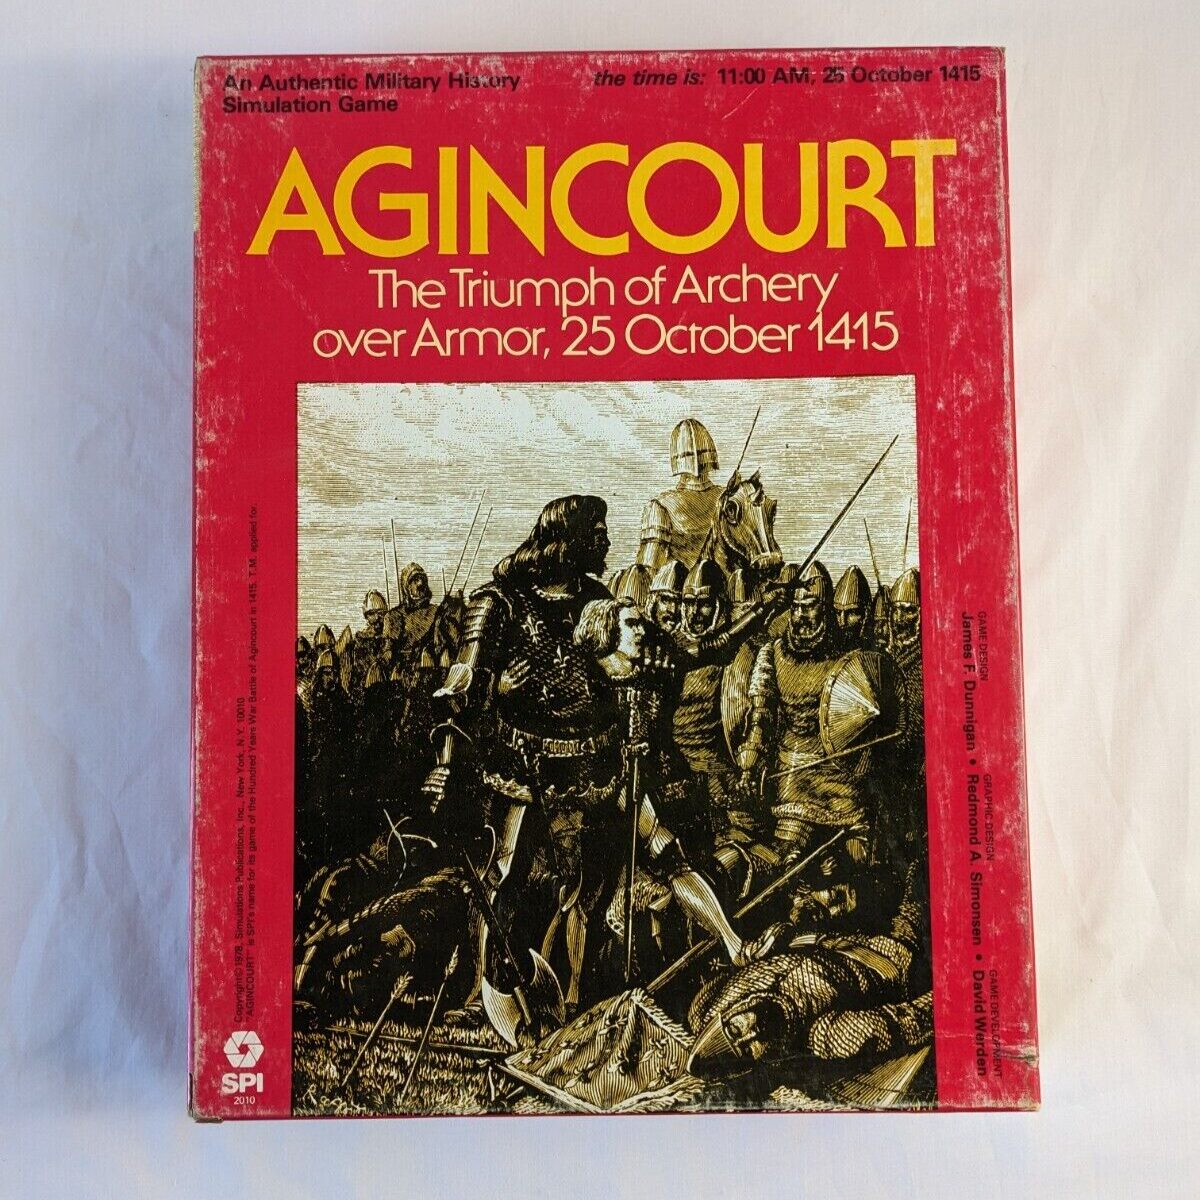 A board game cover titled "AGINCOURT: The Triumph of Archery over Armor, 25 October 1415," featuring an illustration of medieval soldiers in battle.